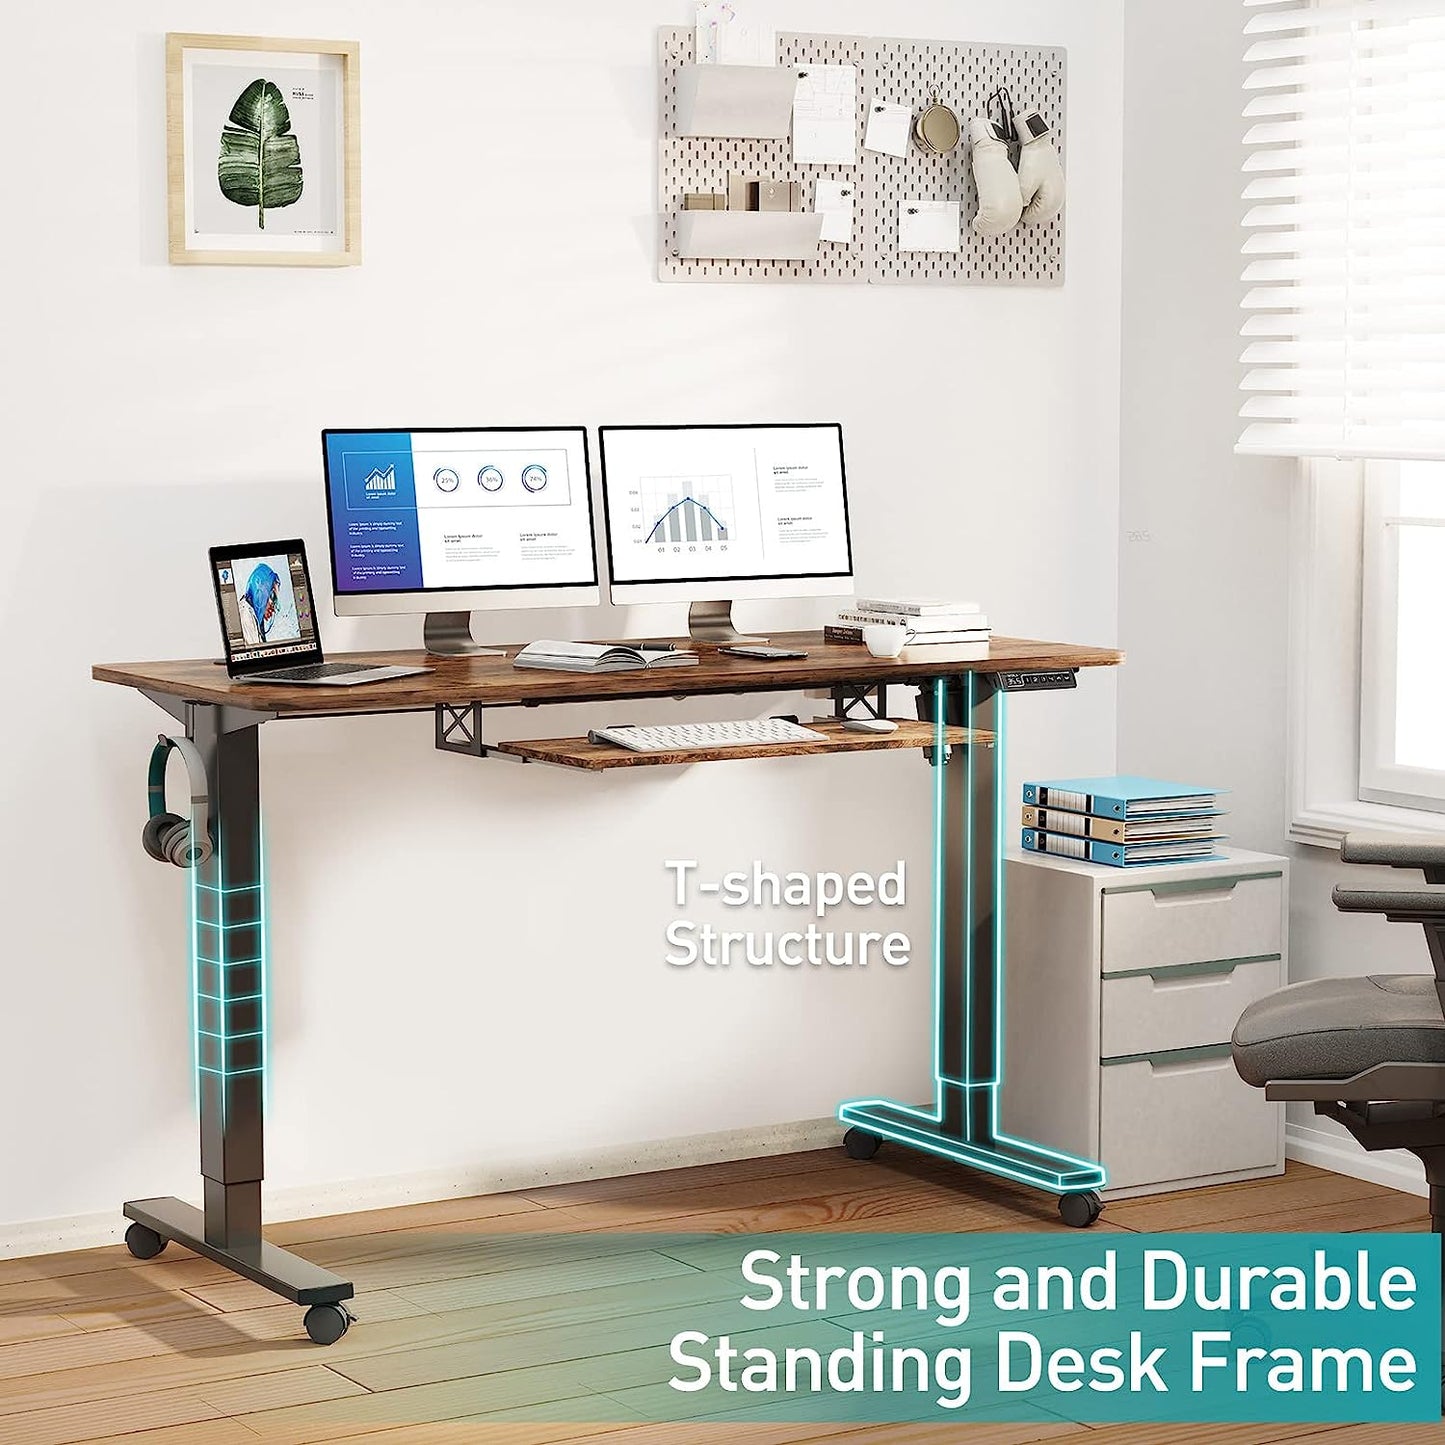 WOKA Electric Standing Desk with Keyboard Tray, 55" x 24" Stand Up Desk, Height Adjustable Sit Stand Desk with Memory Controller for Home Office, Motorized Desk with Splice Board, Rustic